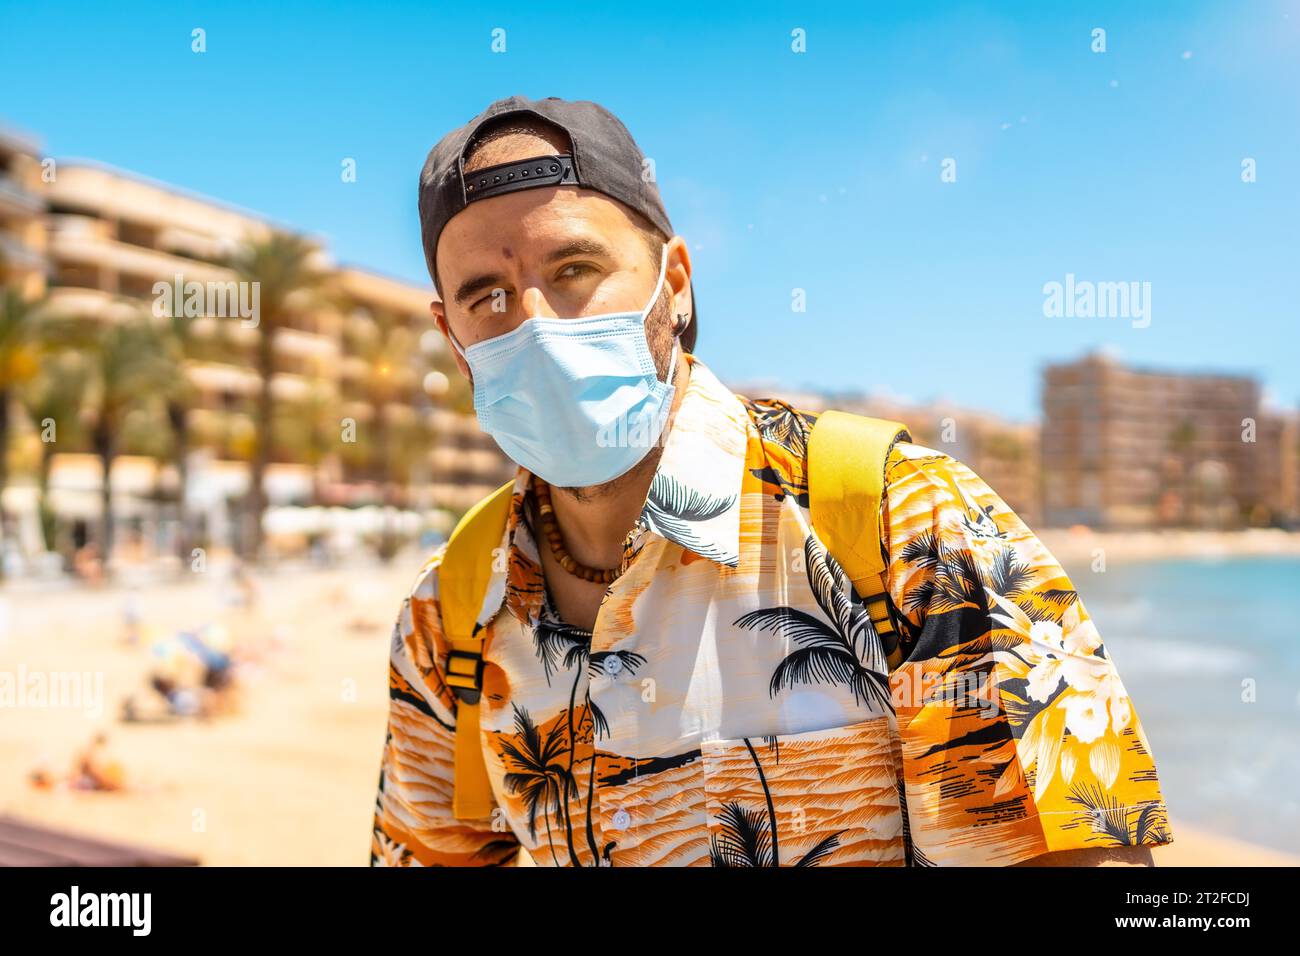 A young man with a tourist surgical mask on the Cura beach in the coastal city of Torrevieja, Alicante, Valencian Community. Spain, Mediterranean Sea Stock Photo